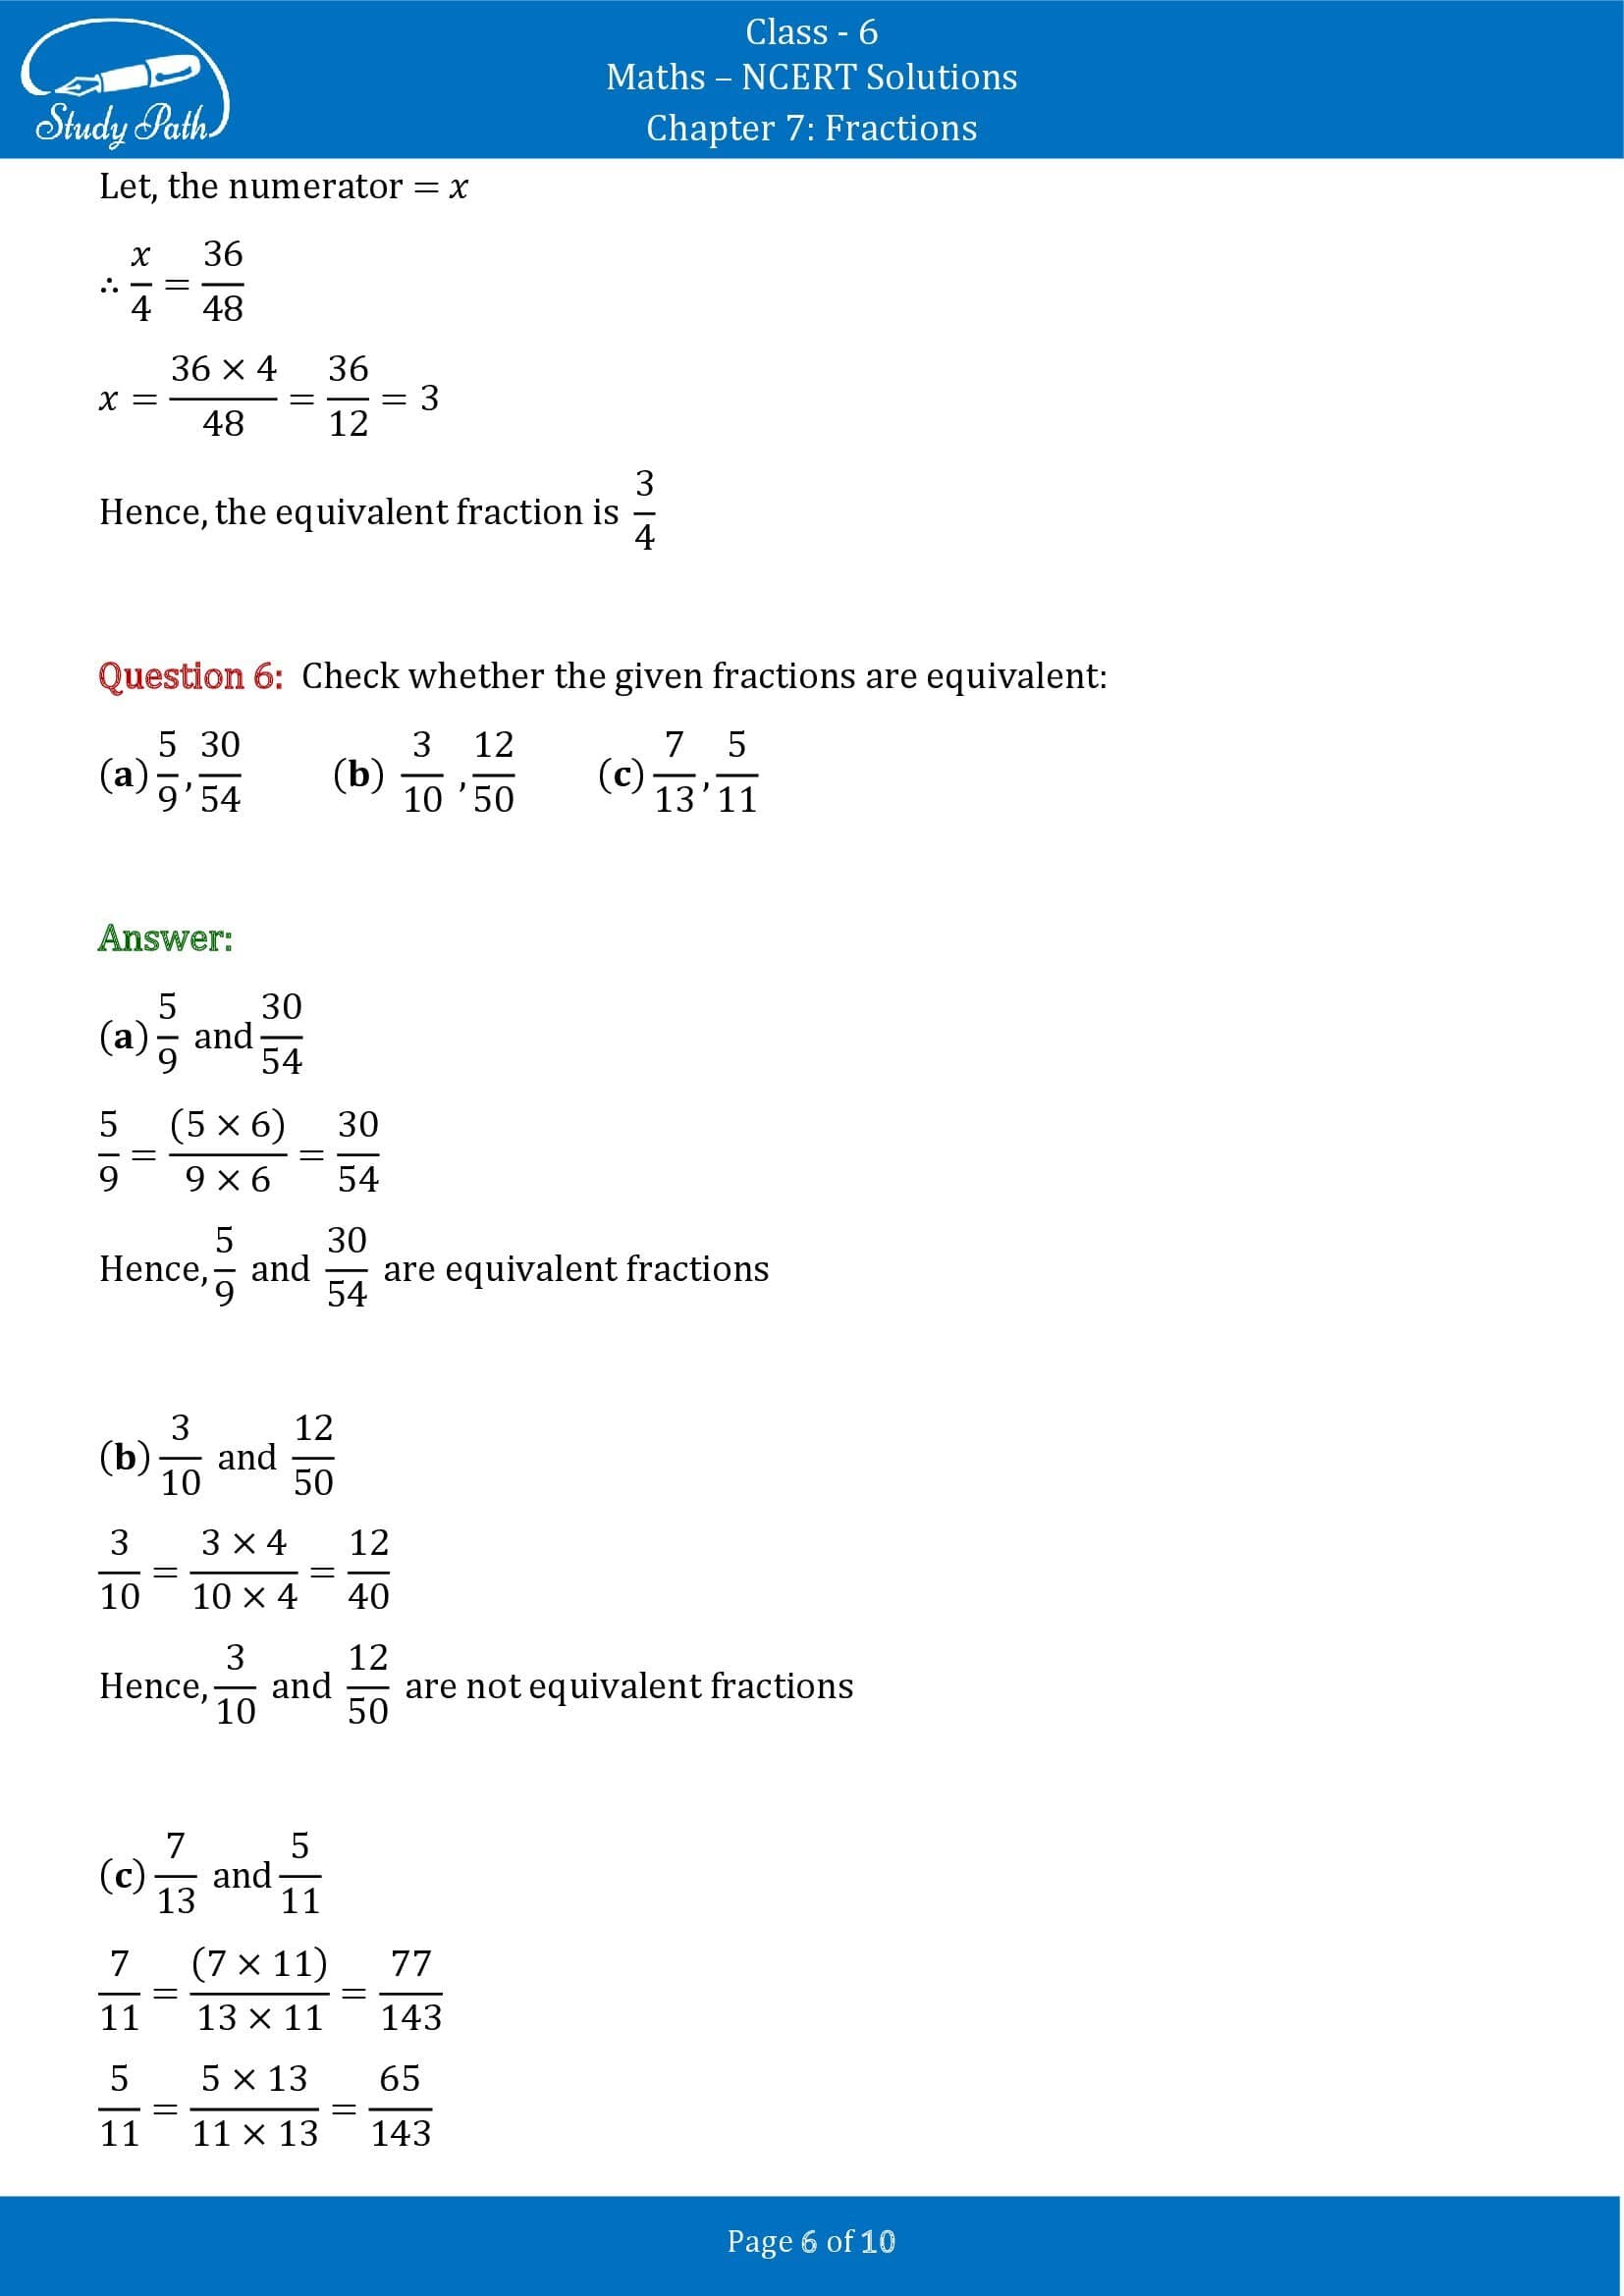 NCERT Solutions for Class 6 Maths Chapter 7 Fractions Exercise 7.3 00006